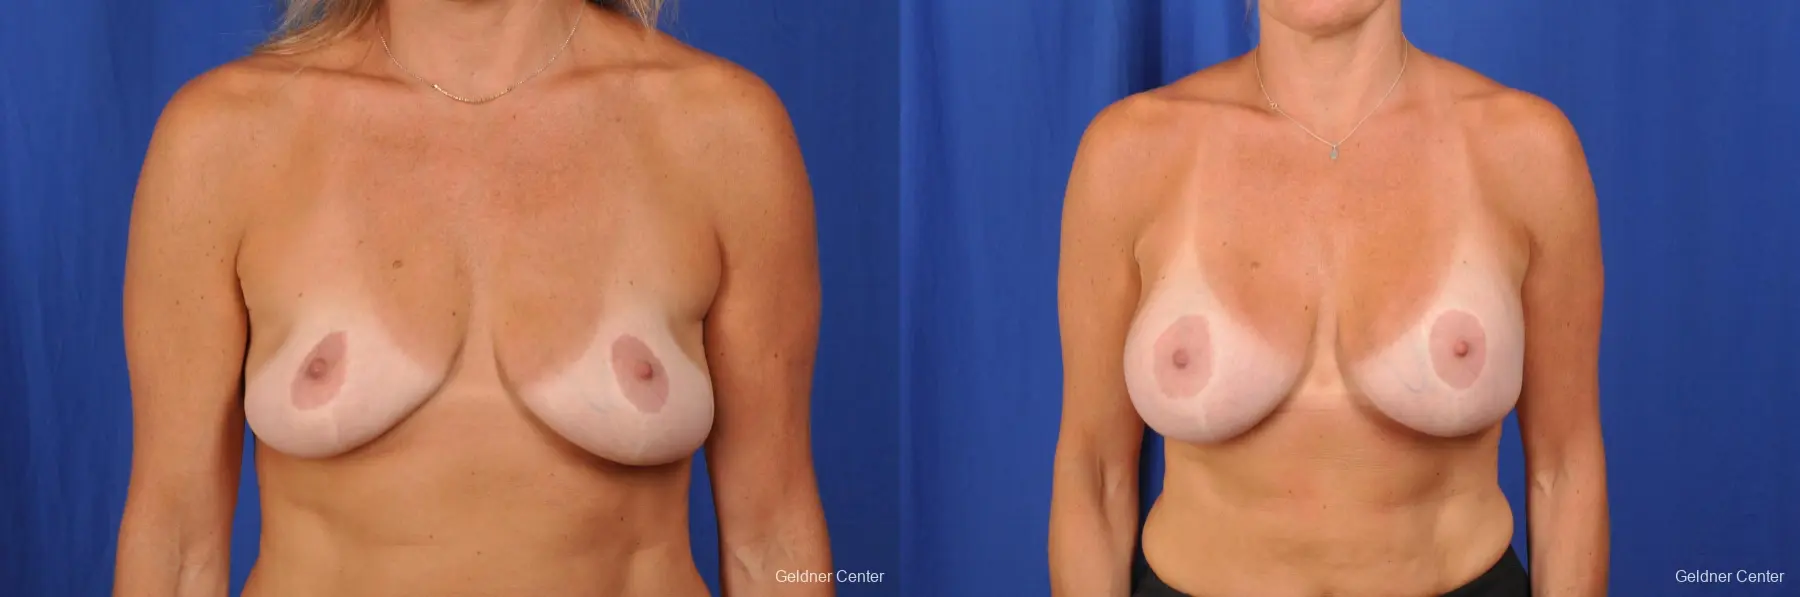 Breast Augmentation Hinsdale, Chicago 2391 - Before and After 1